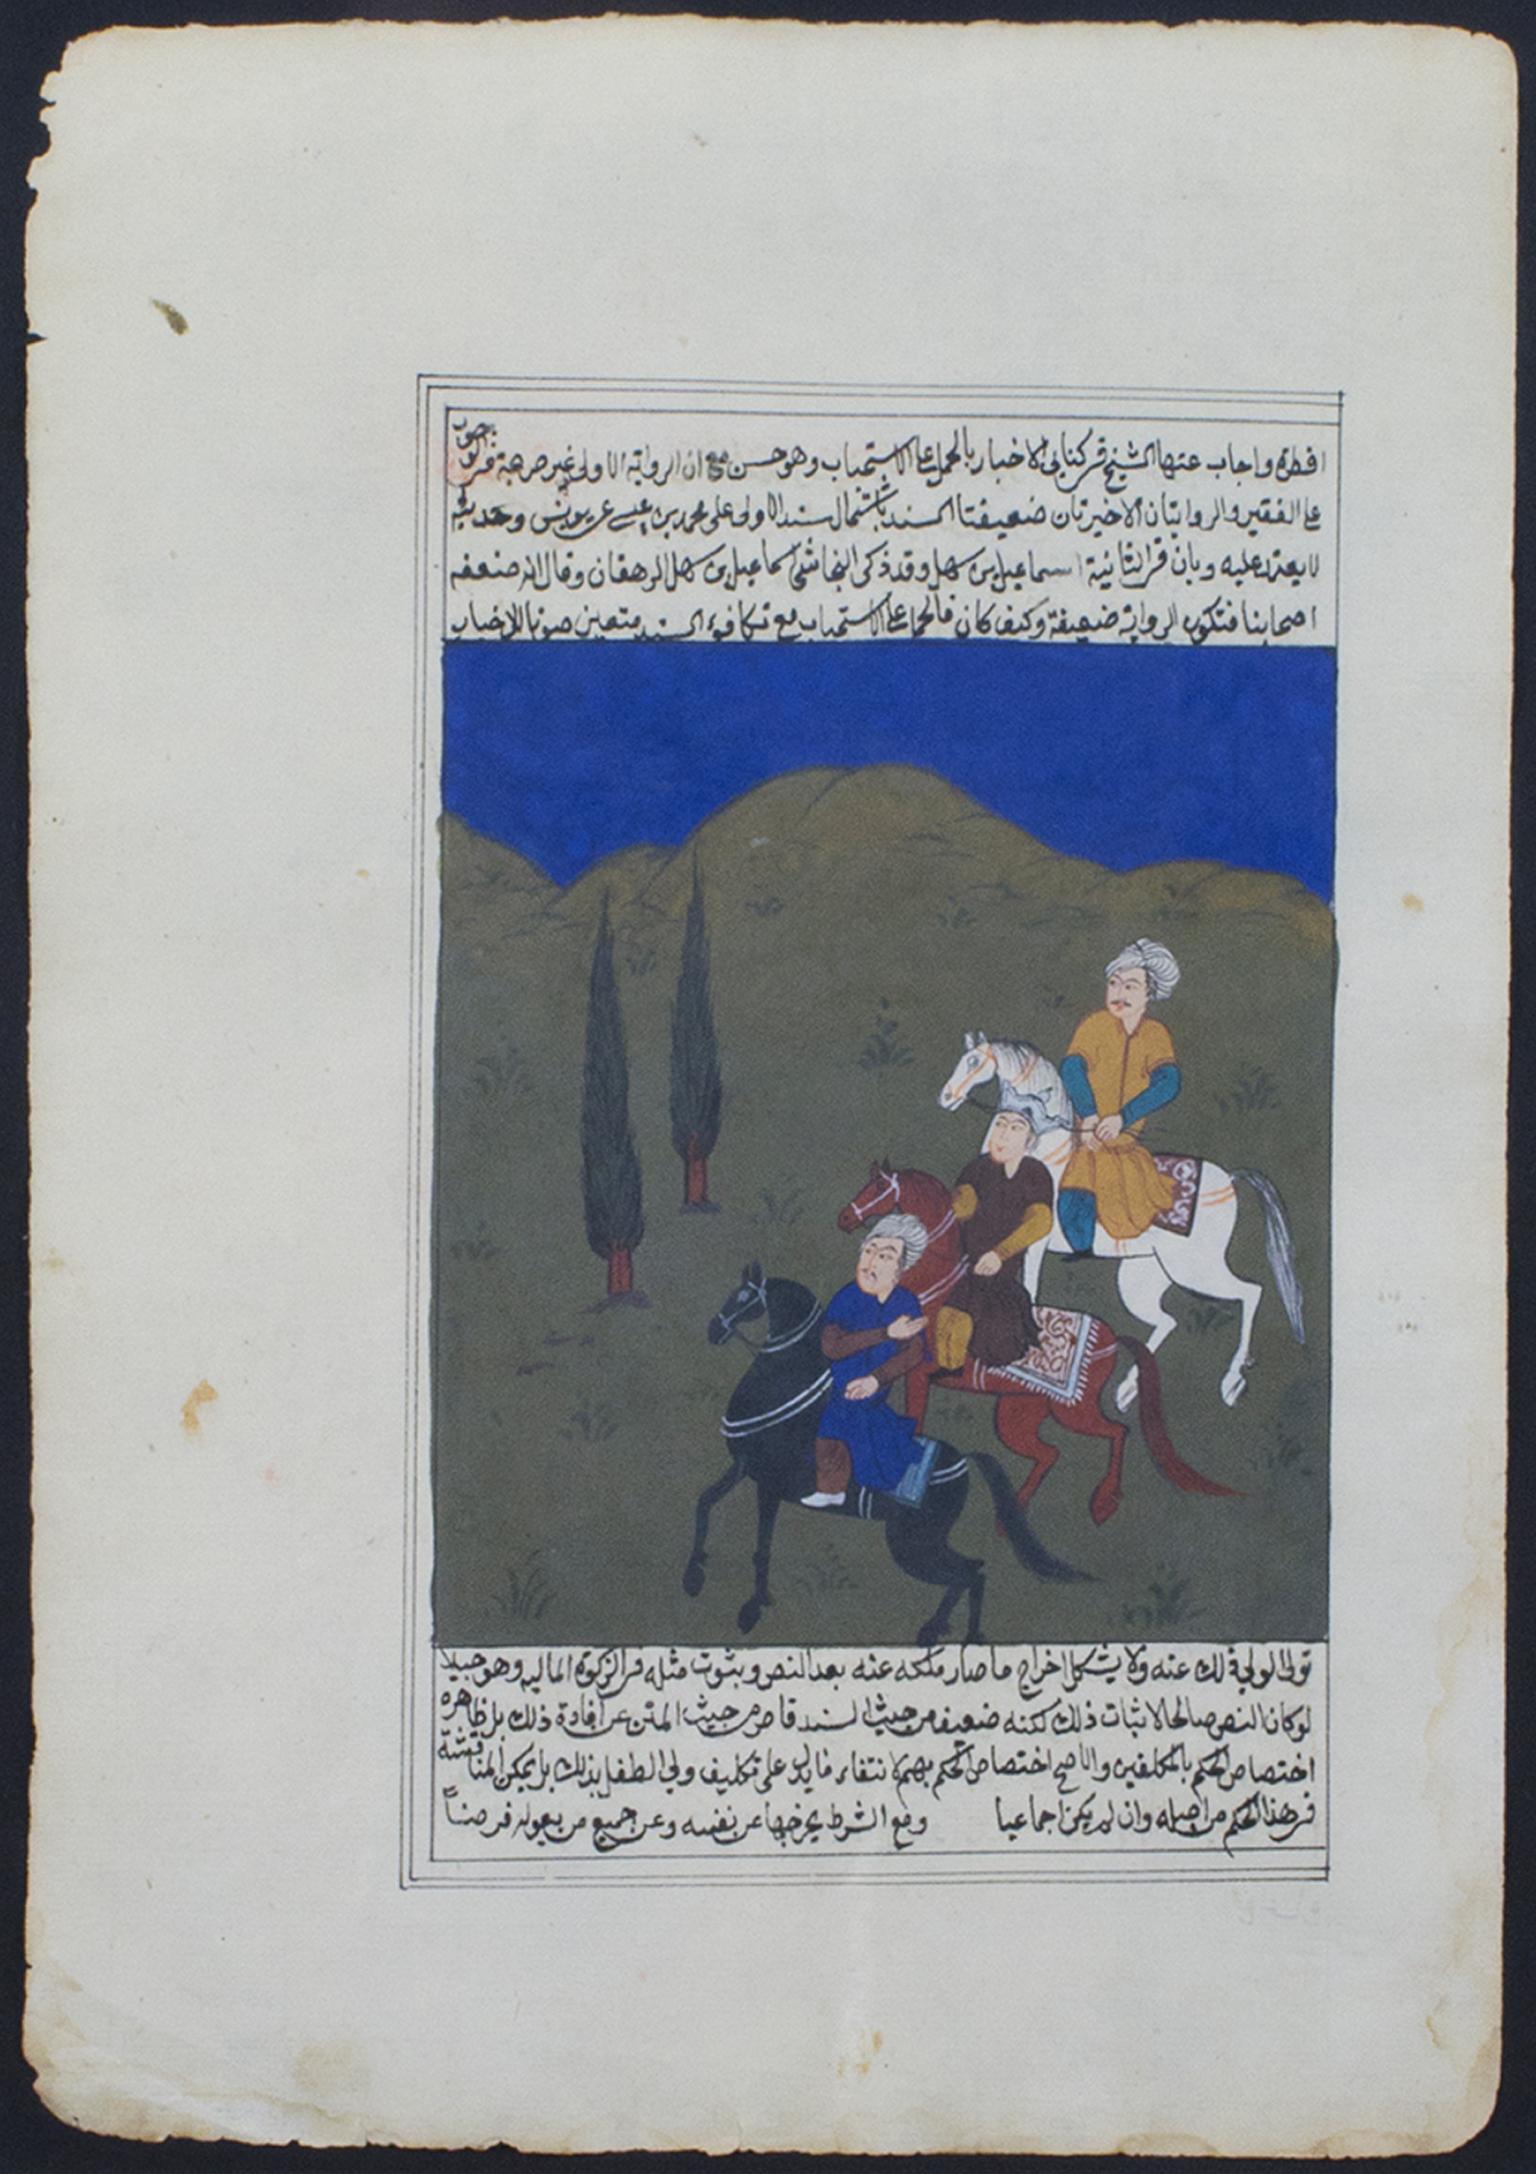 "Three Riders, Two Trees" is an original tempera painting by an unknown Persian artist. it features three royal figures on three horses riding through a mostly barren landscape. There are two thin trees. The horses are white, brown, and black, and